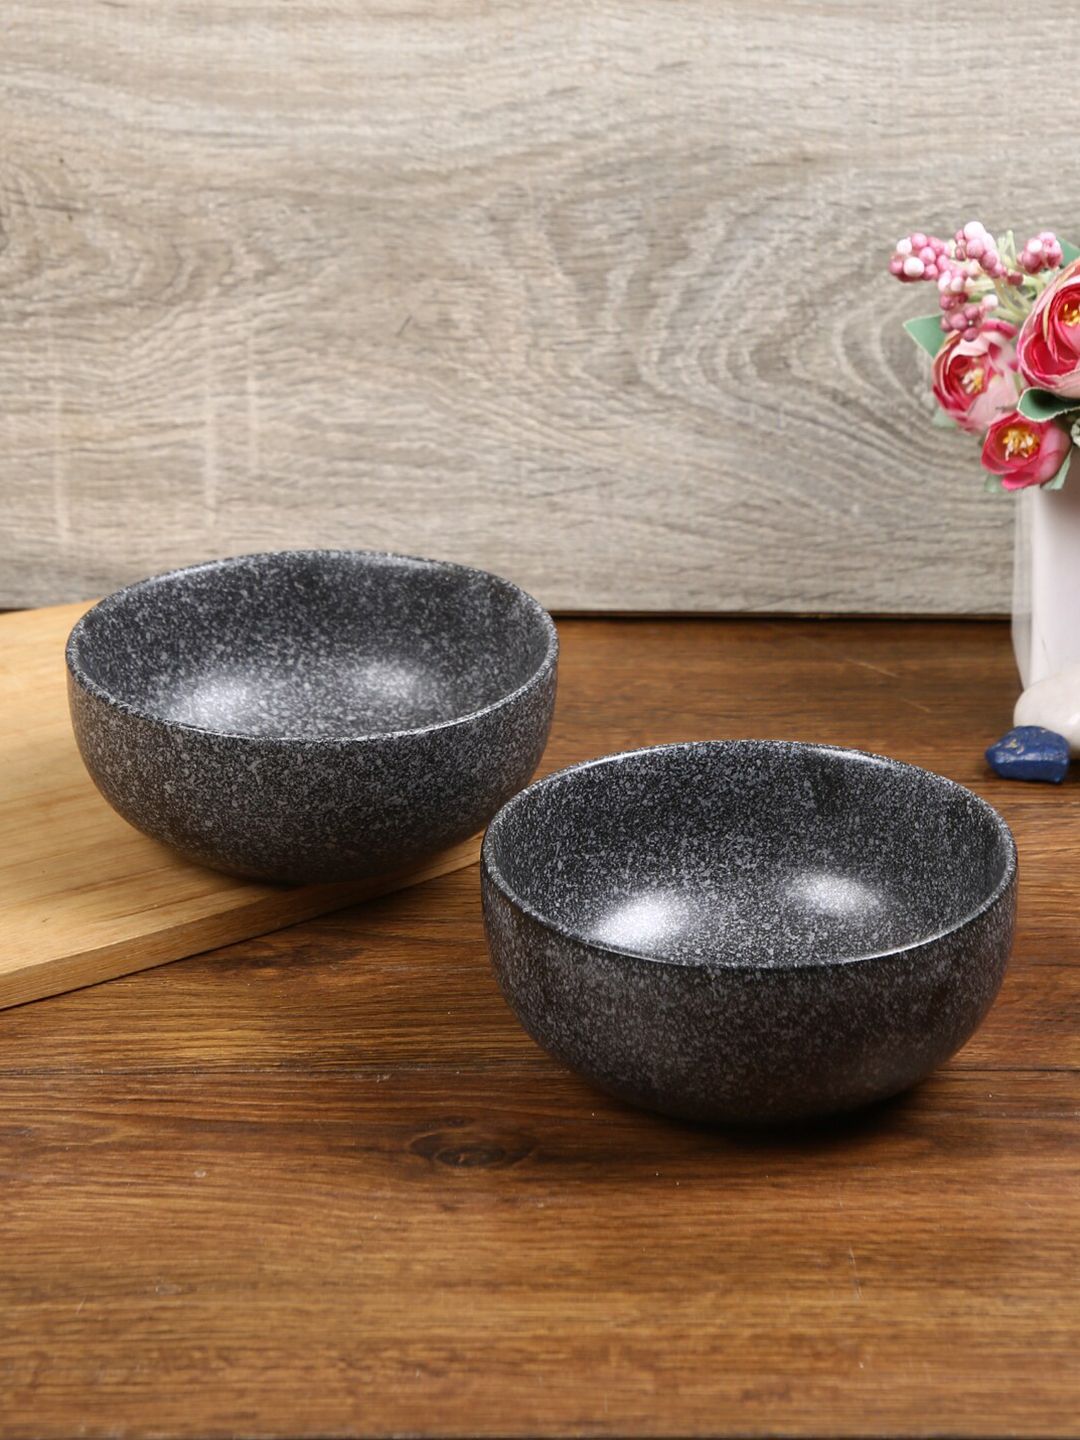 Aapno Rajasthan Grey 2 Pieces Textured Ceramic Glossy Bowls Price in India